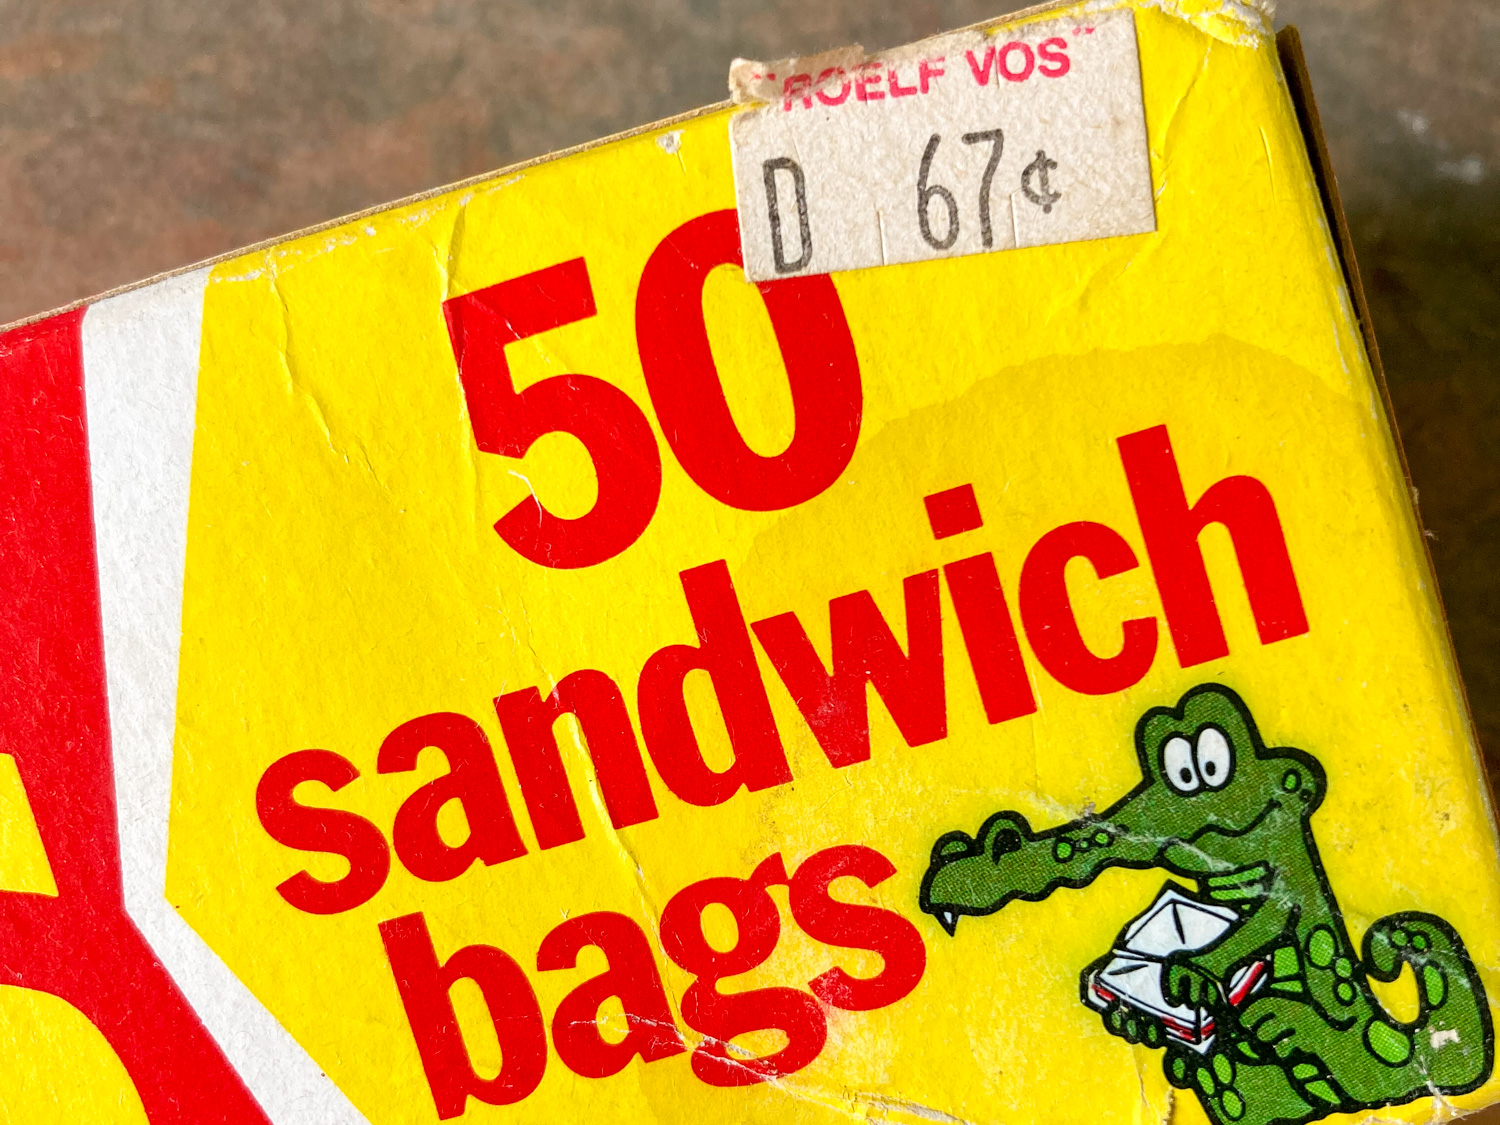 Part of a box, with red text on a yellow background stating "50 sandwich bags" with a picture of a cartoon alligator and a price sticker with the words ROELF VOS D 67c